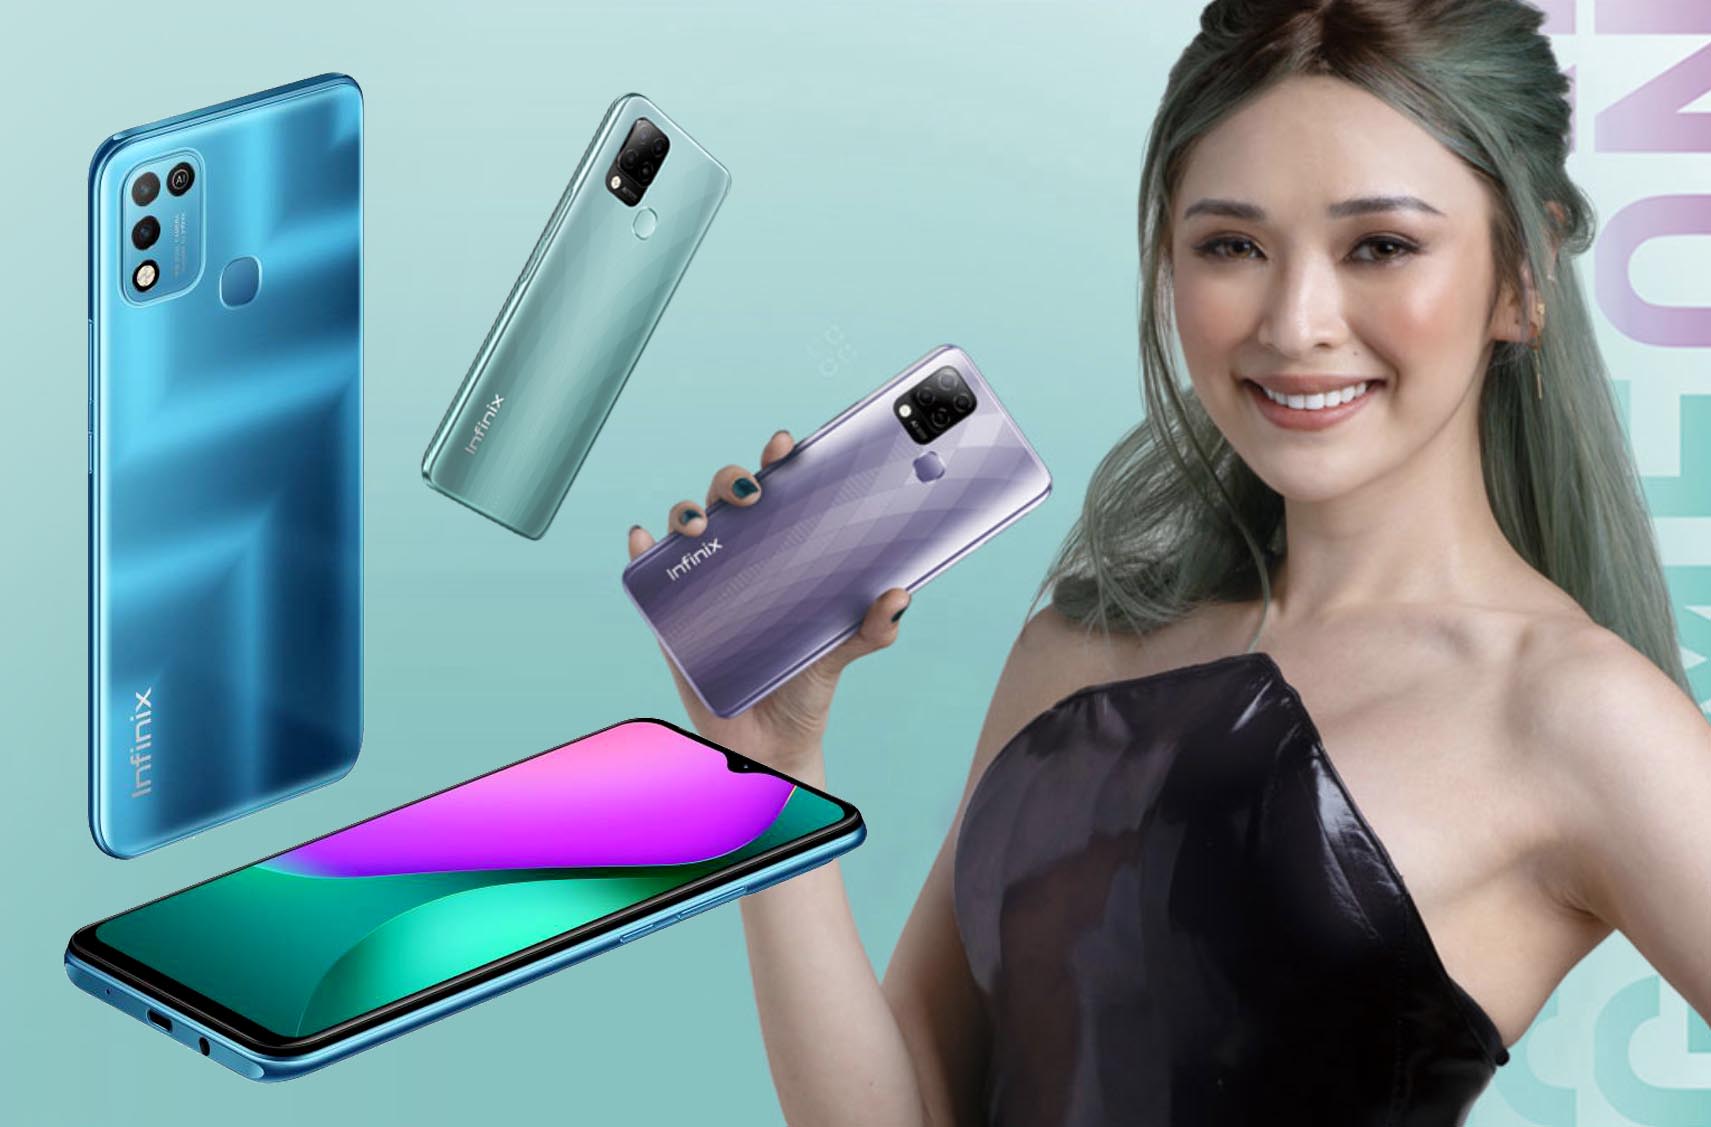 Infinix offers budget-friendly gaming smartphones under 8K with up to 10% off on Shopee 8.8 Mega Flash Sale!